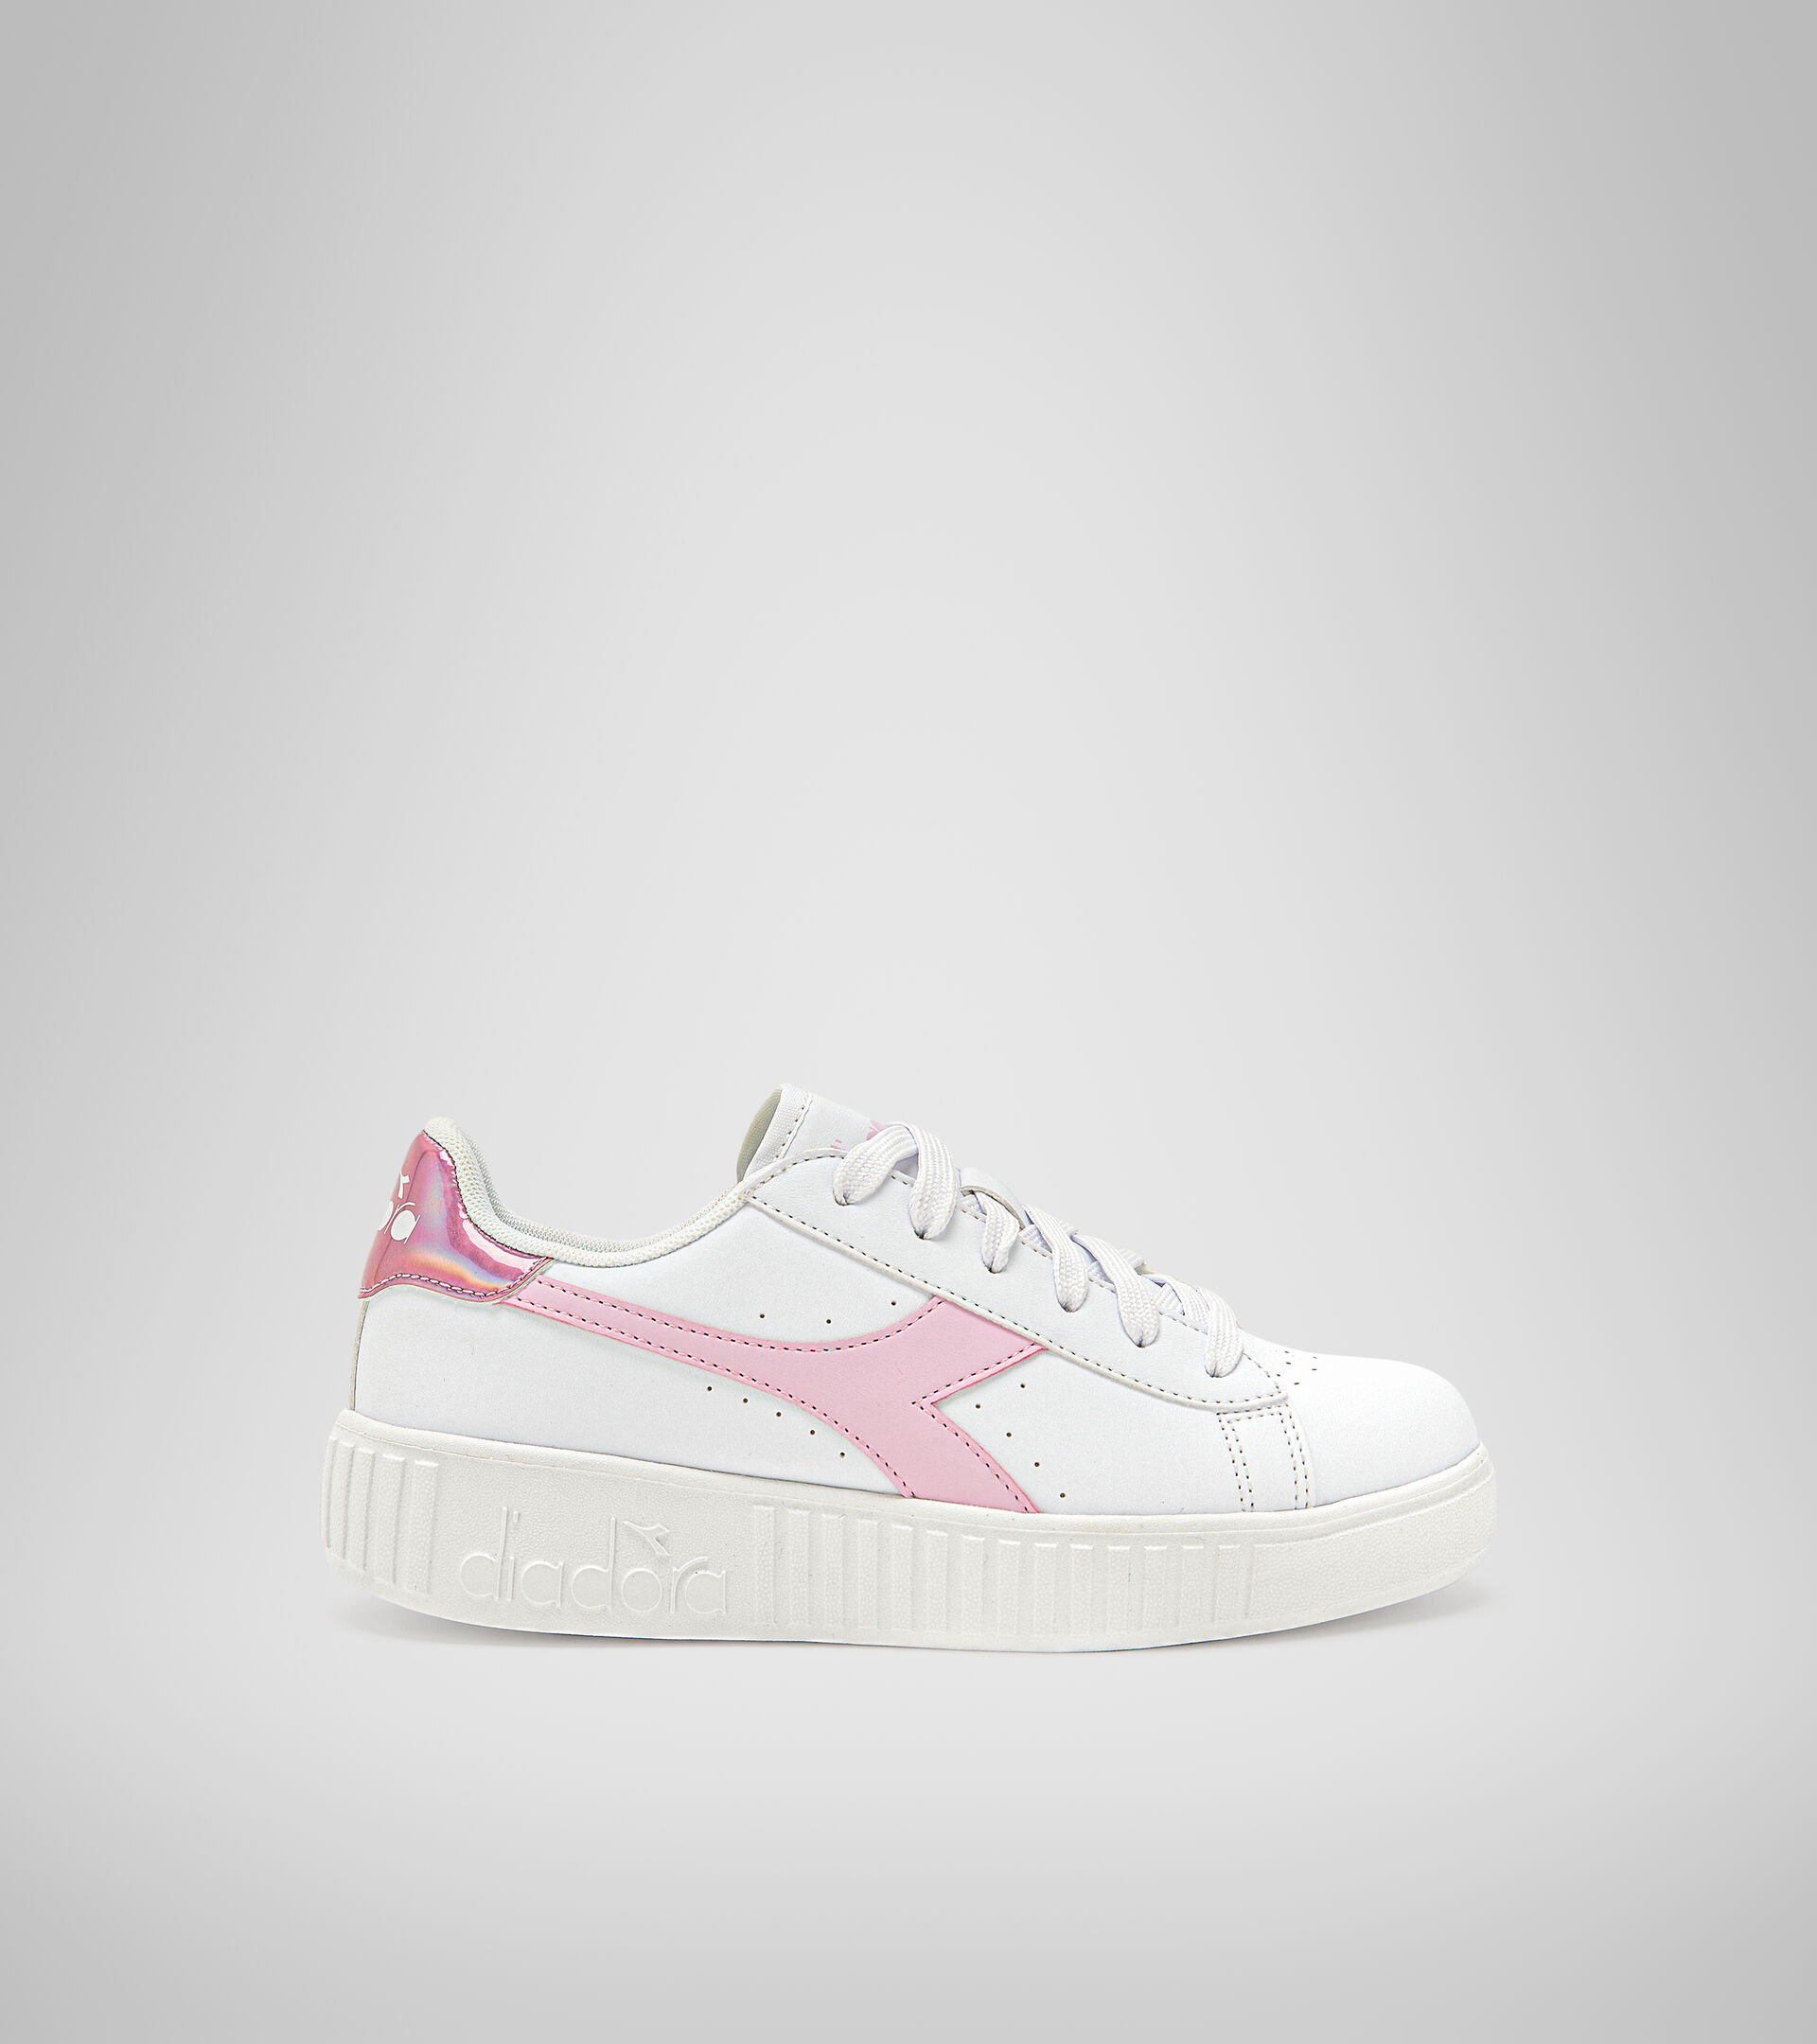 Sports shoes - Youth 8-16 years GAME STEP GS WHITE/METALIZED PINK - Diadora